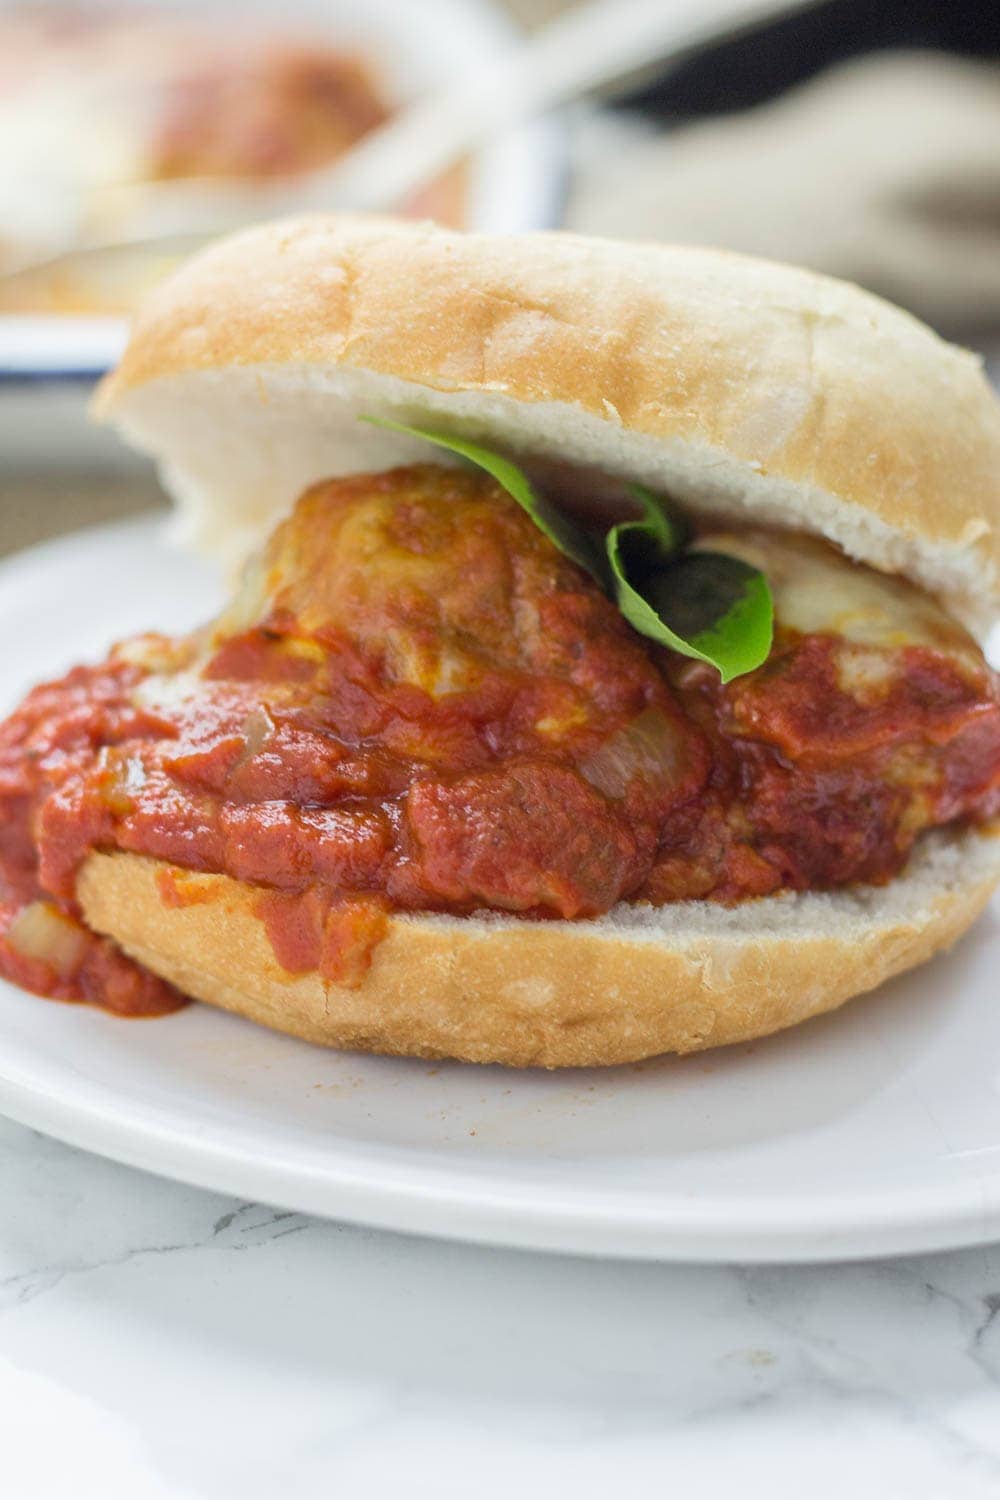 These cheesy baked meatball sandwiches are the perfect thing to feed a crowd! Serve for a party or just as a weeknight dinner the whole family will love.